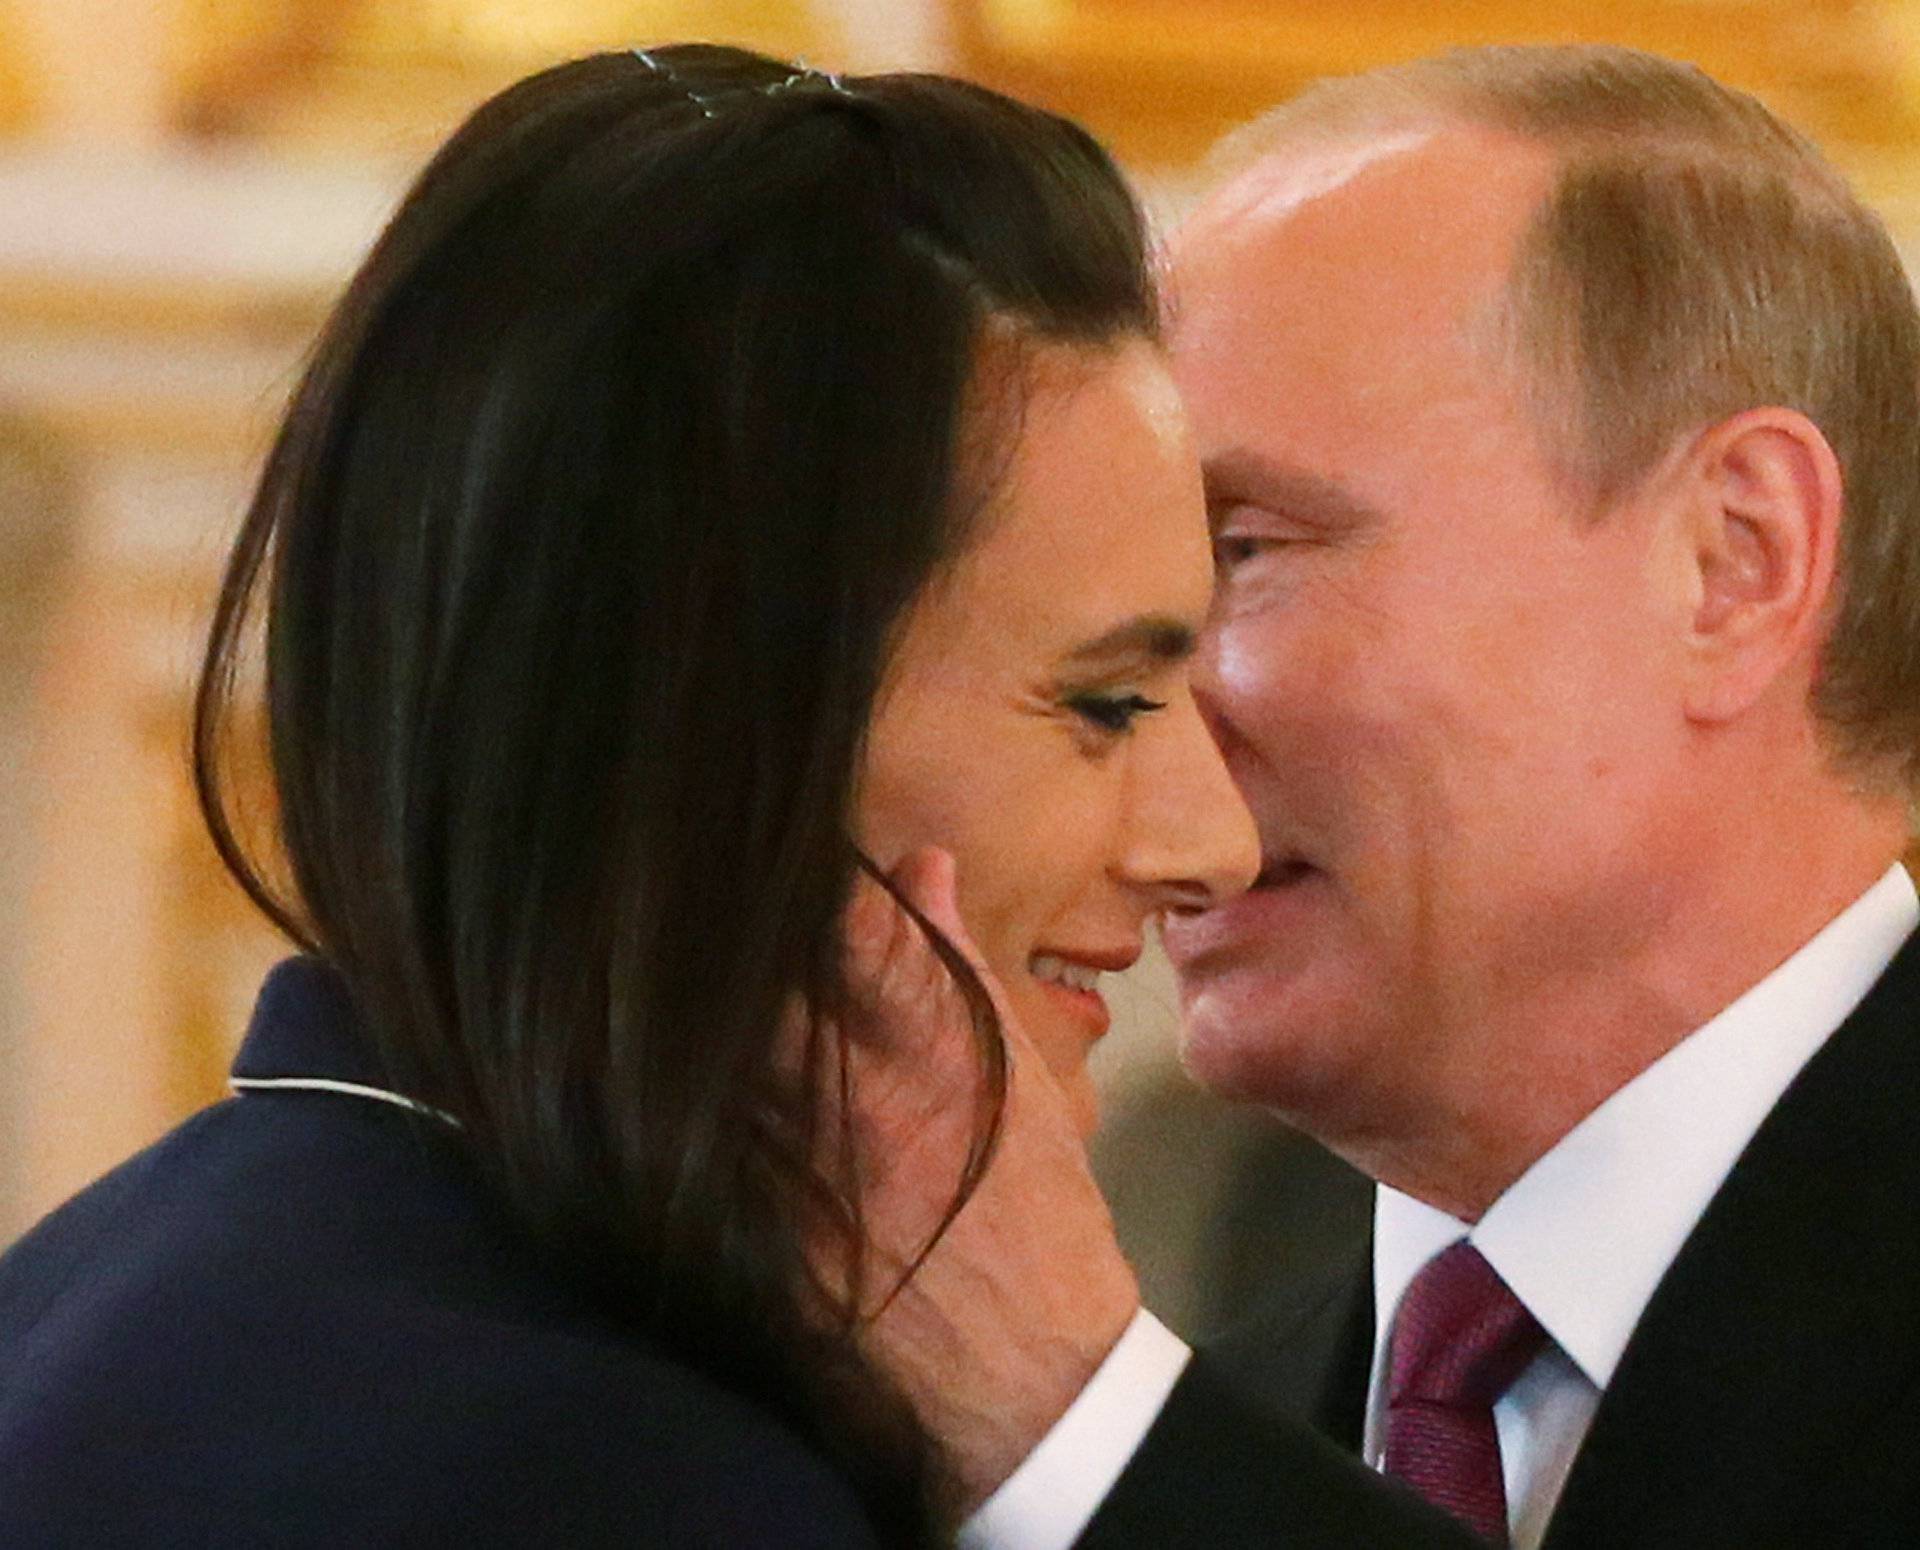 Russian President Putin greets track-and-field athlete Isinbayeva during personal send-off for members of Russian Olympic team at Kremlin in Moscow